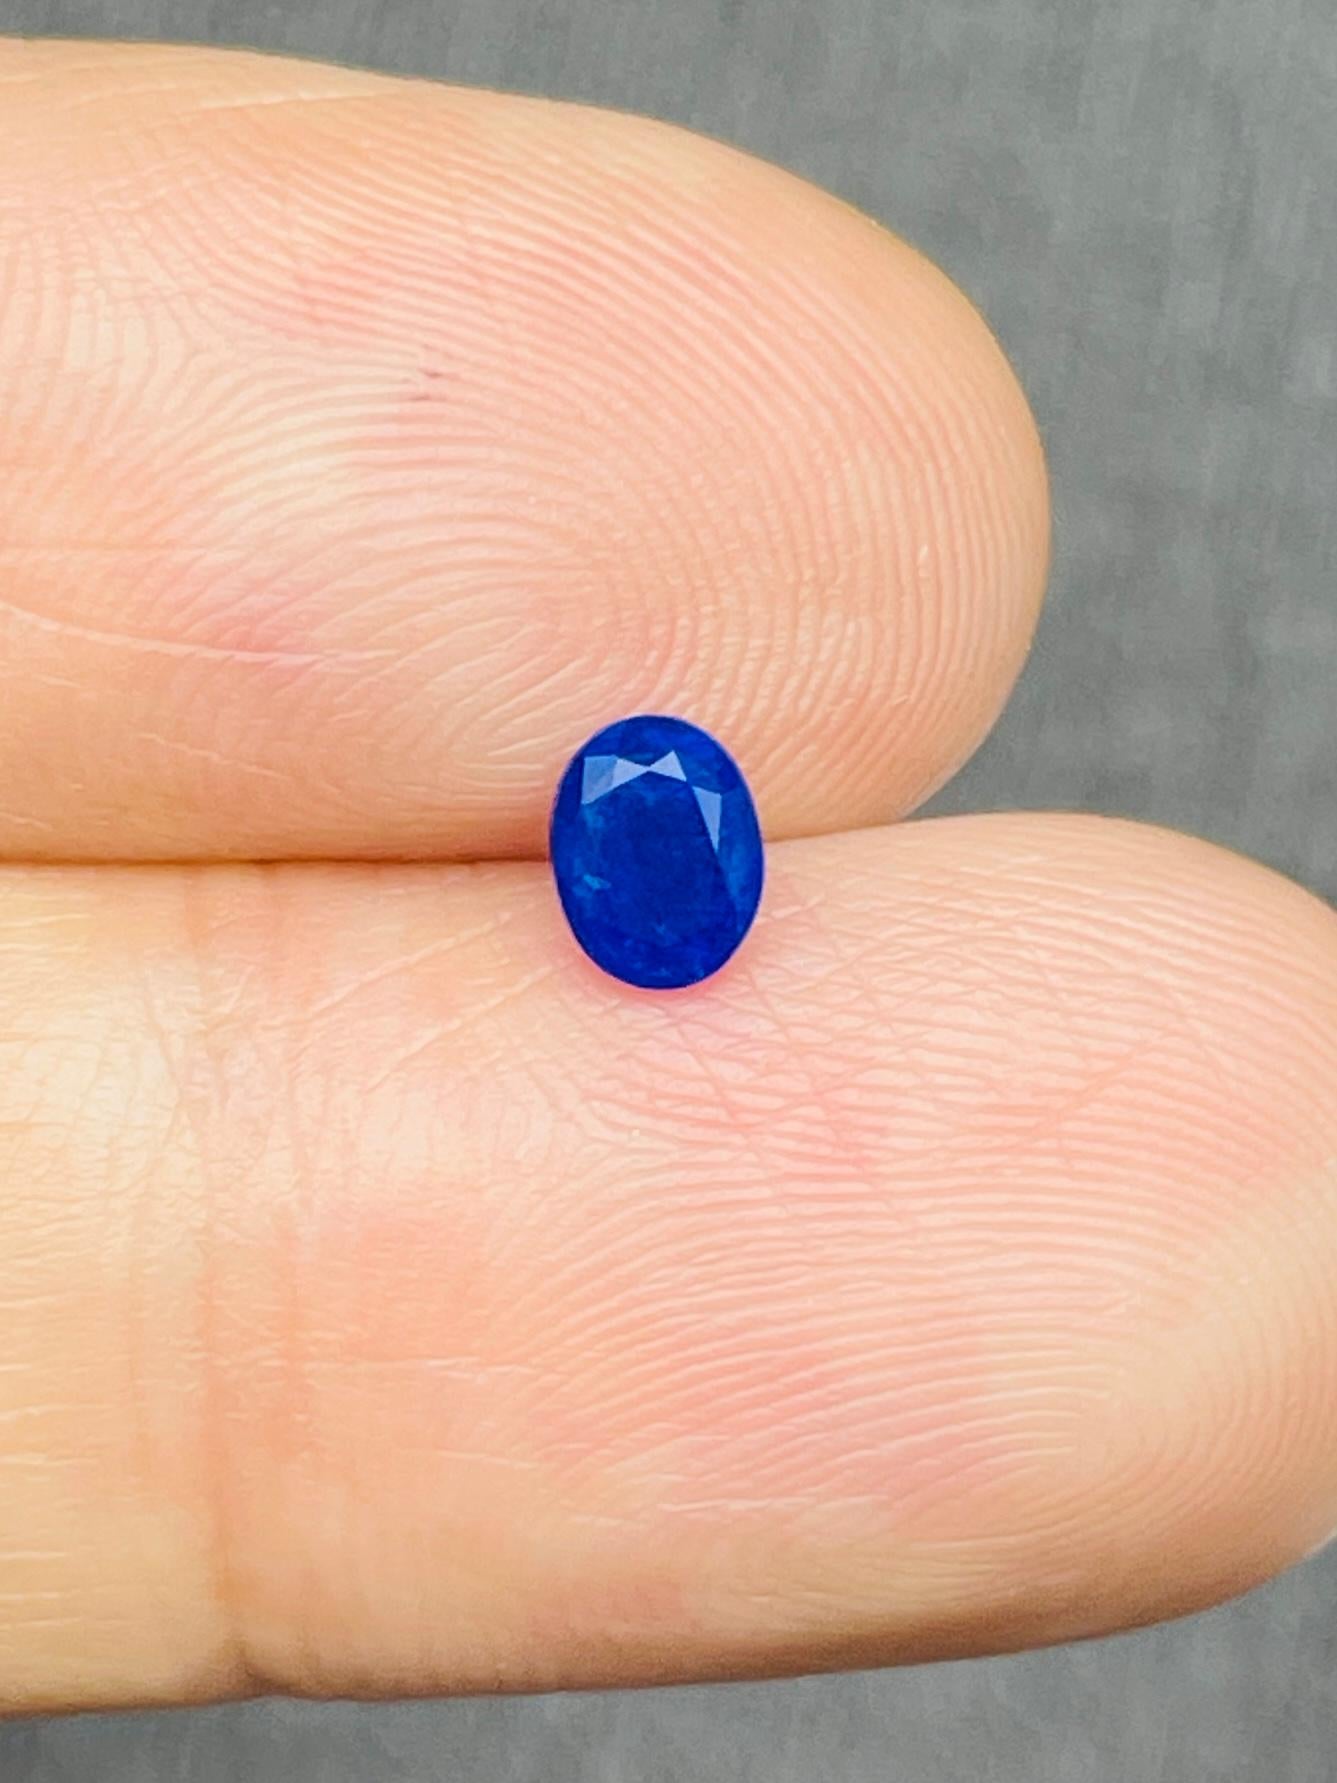 Name: Hauyne
Weight: 0.27ct
Size:  On certificate 
Origin: Afghanistan 
Color: deep blue 
Clarity: eye clean
Cut : standard cut no defect
Certificate: GIT ( Thai National Official Laboratory)